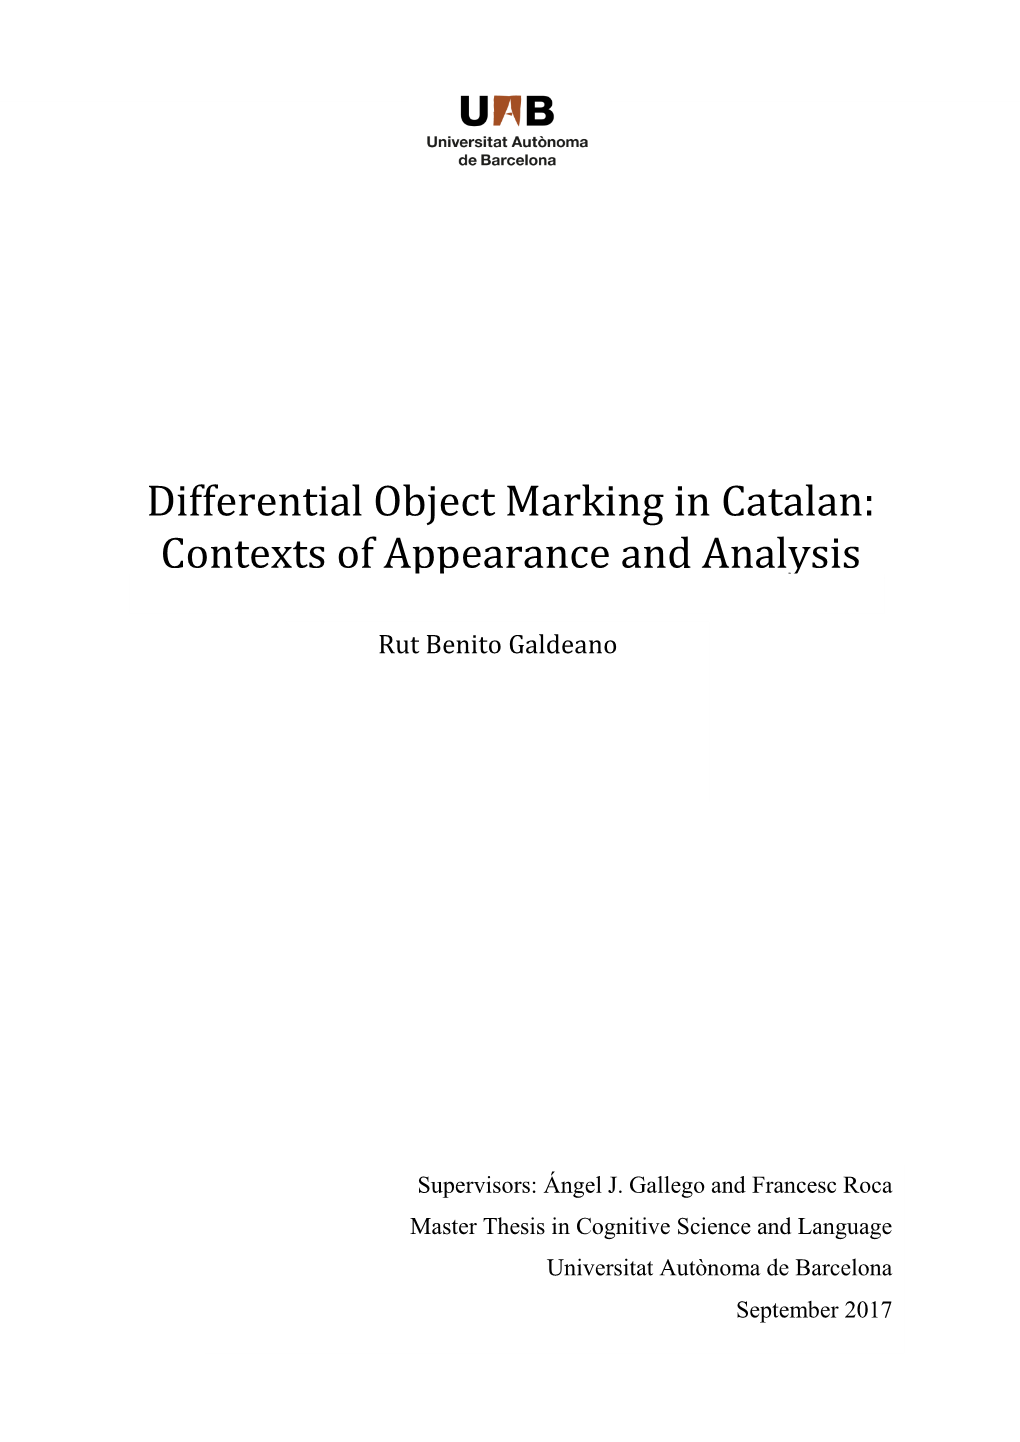 Differential Object Marking in Catalan: Contexts of Appearance and Analysis